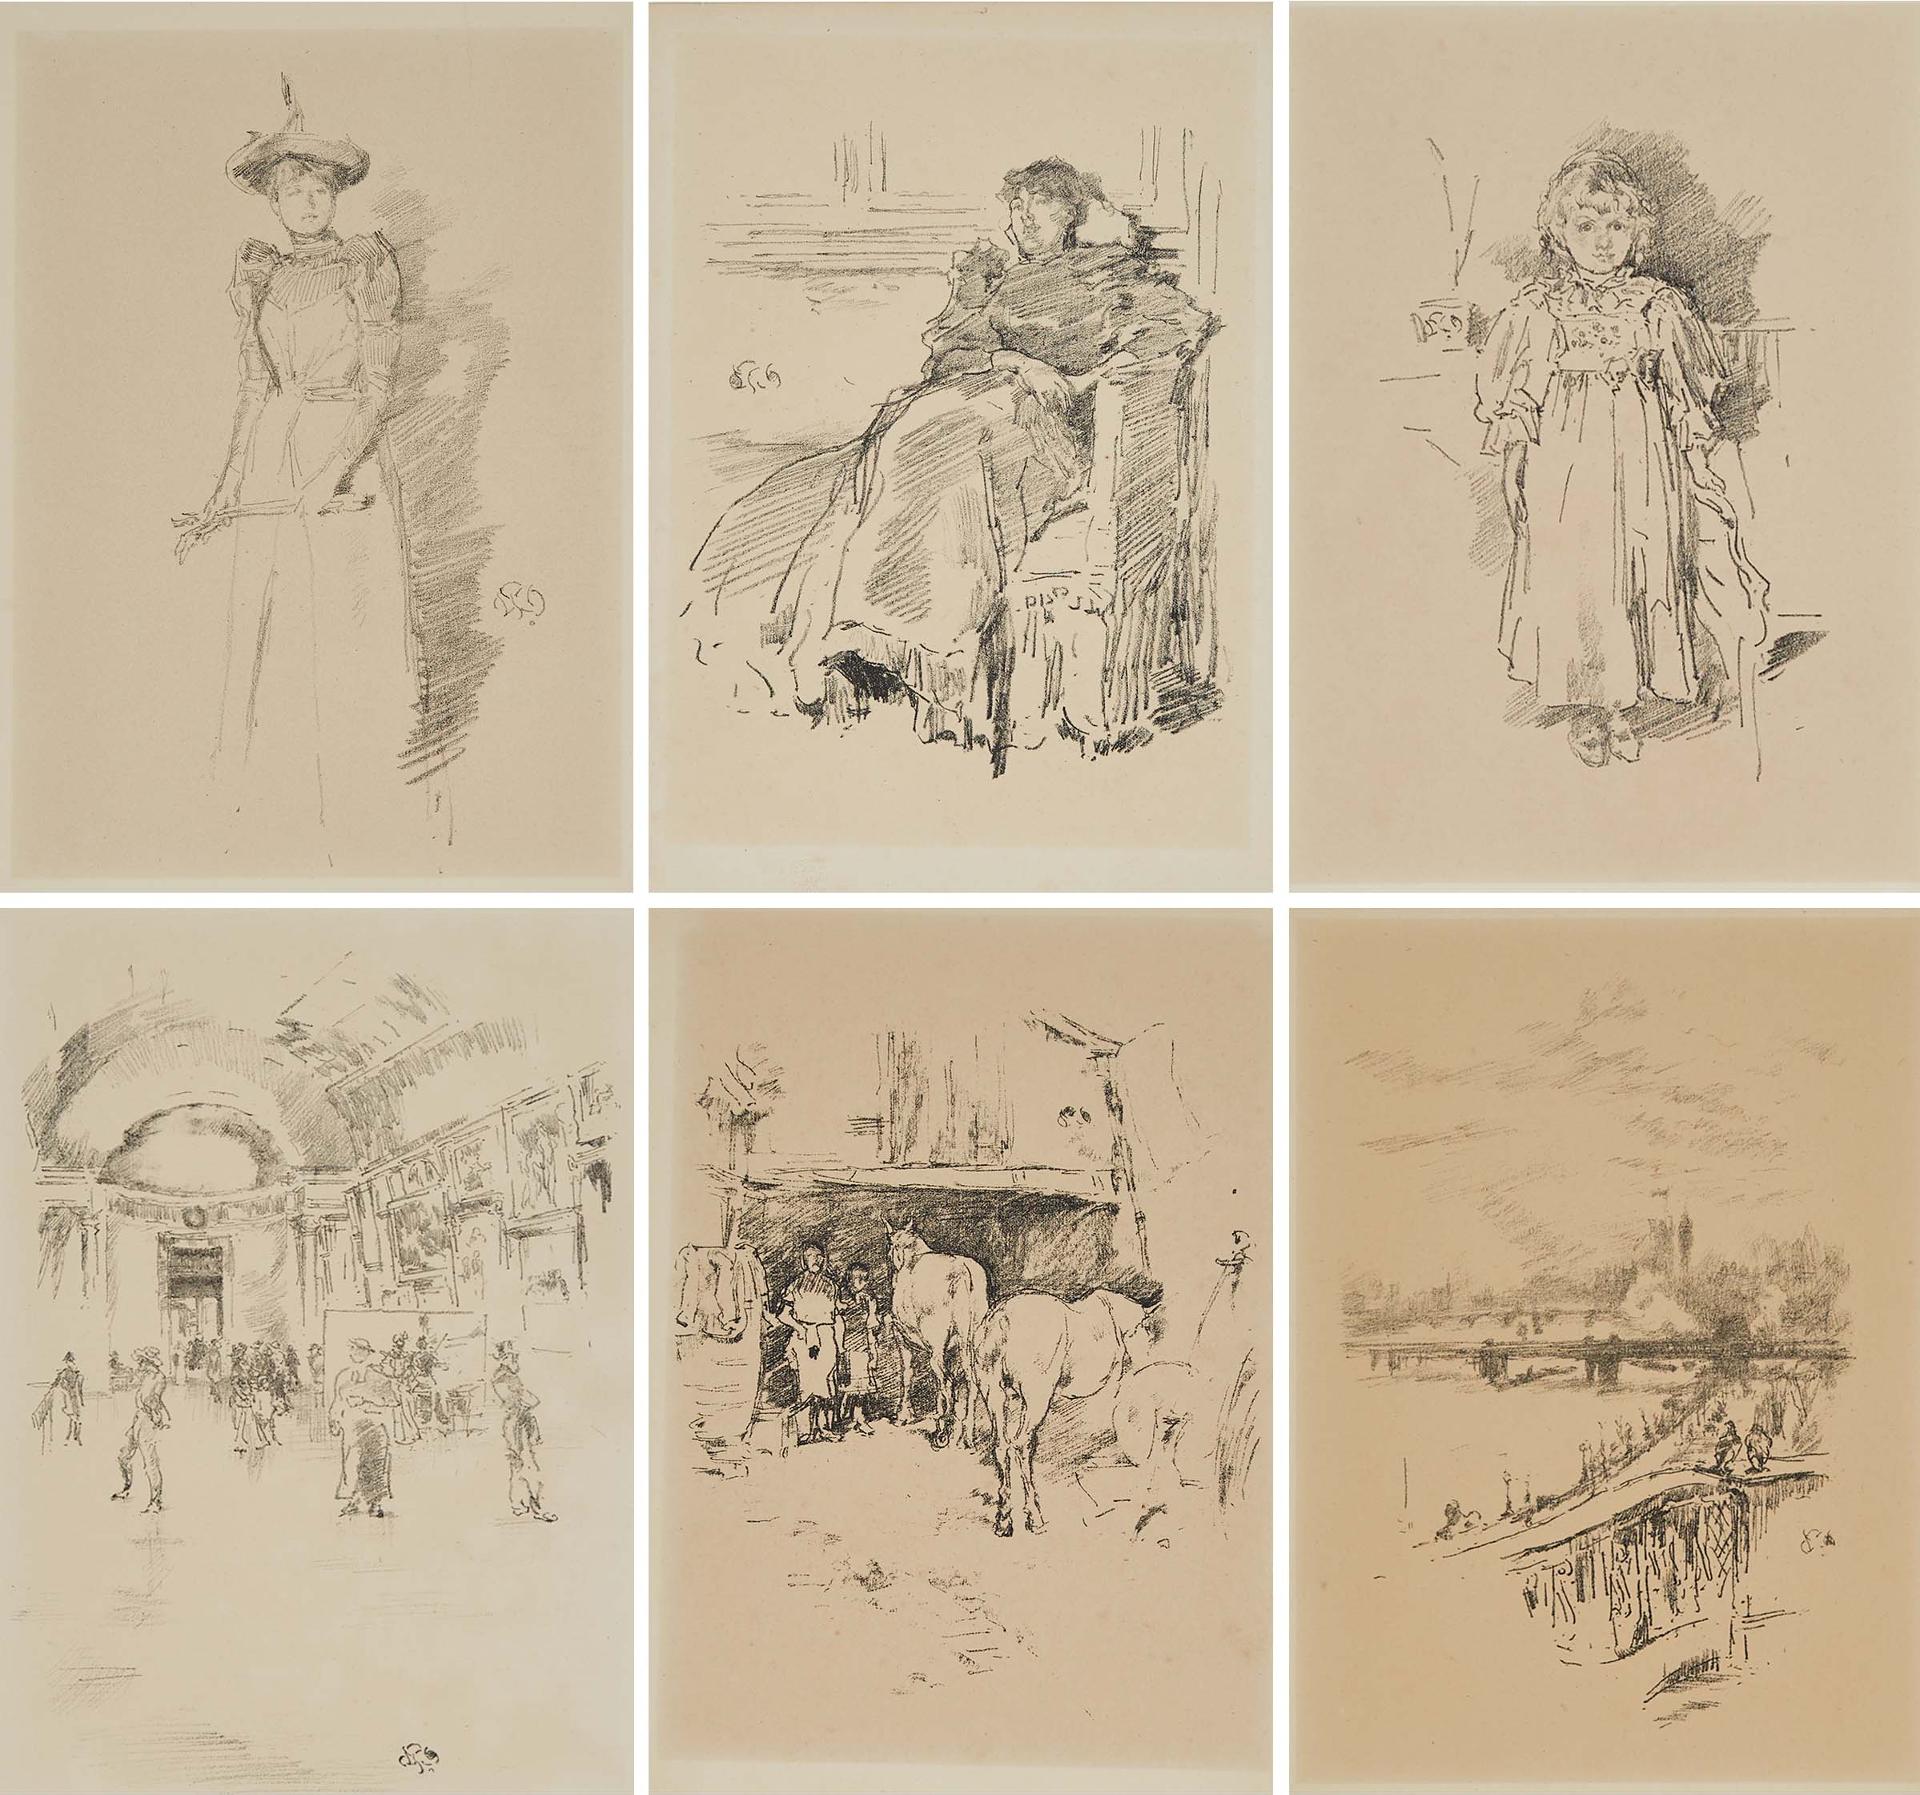 James Abbott McNeill Whistler (1834-1903) - SIX PLATES FROM THE STUDIO AND ART JOURNAL  [WAY, 26, 68, 110, 52; LEVY, 40, 96, 159, 83, 164; SPINK 35, 107, 146, 124] 1890; 1894 (2); 1896 (2); 1895